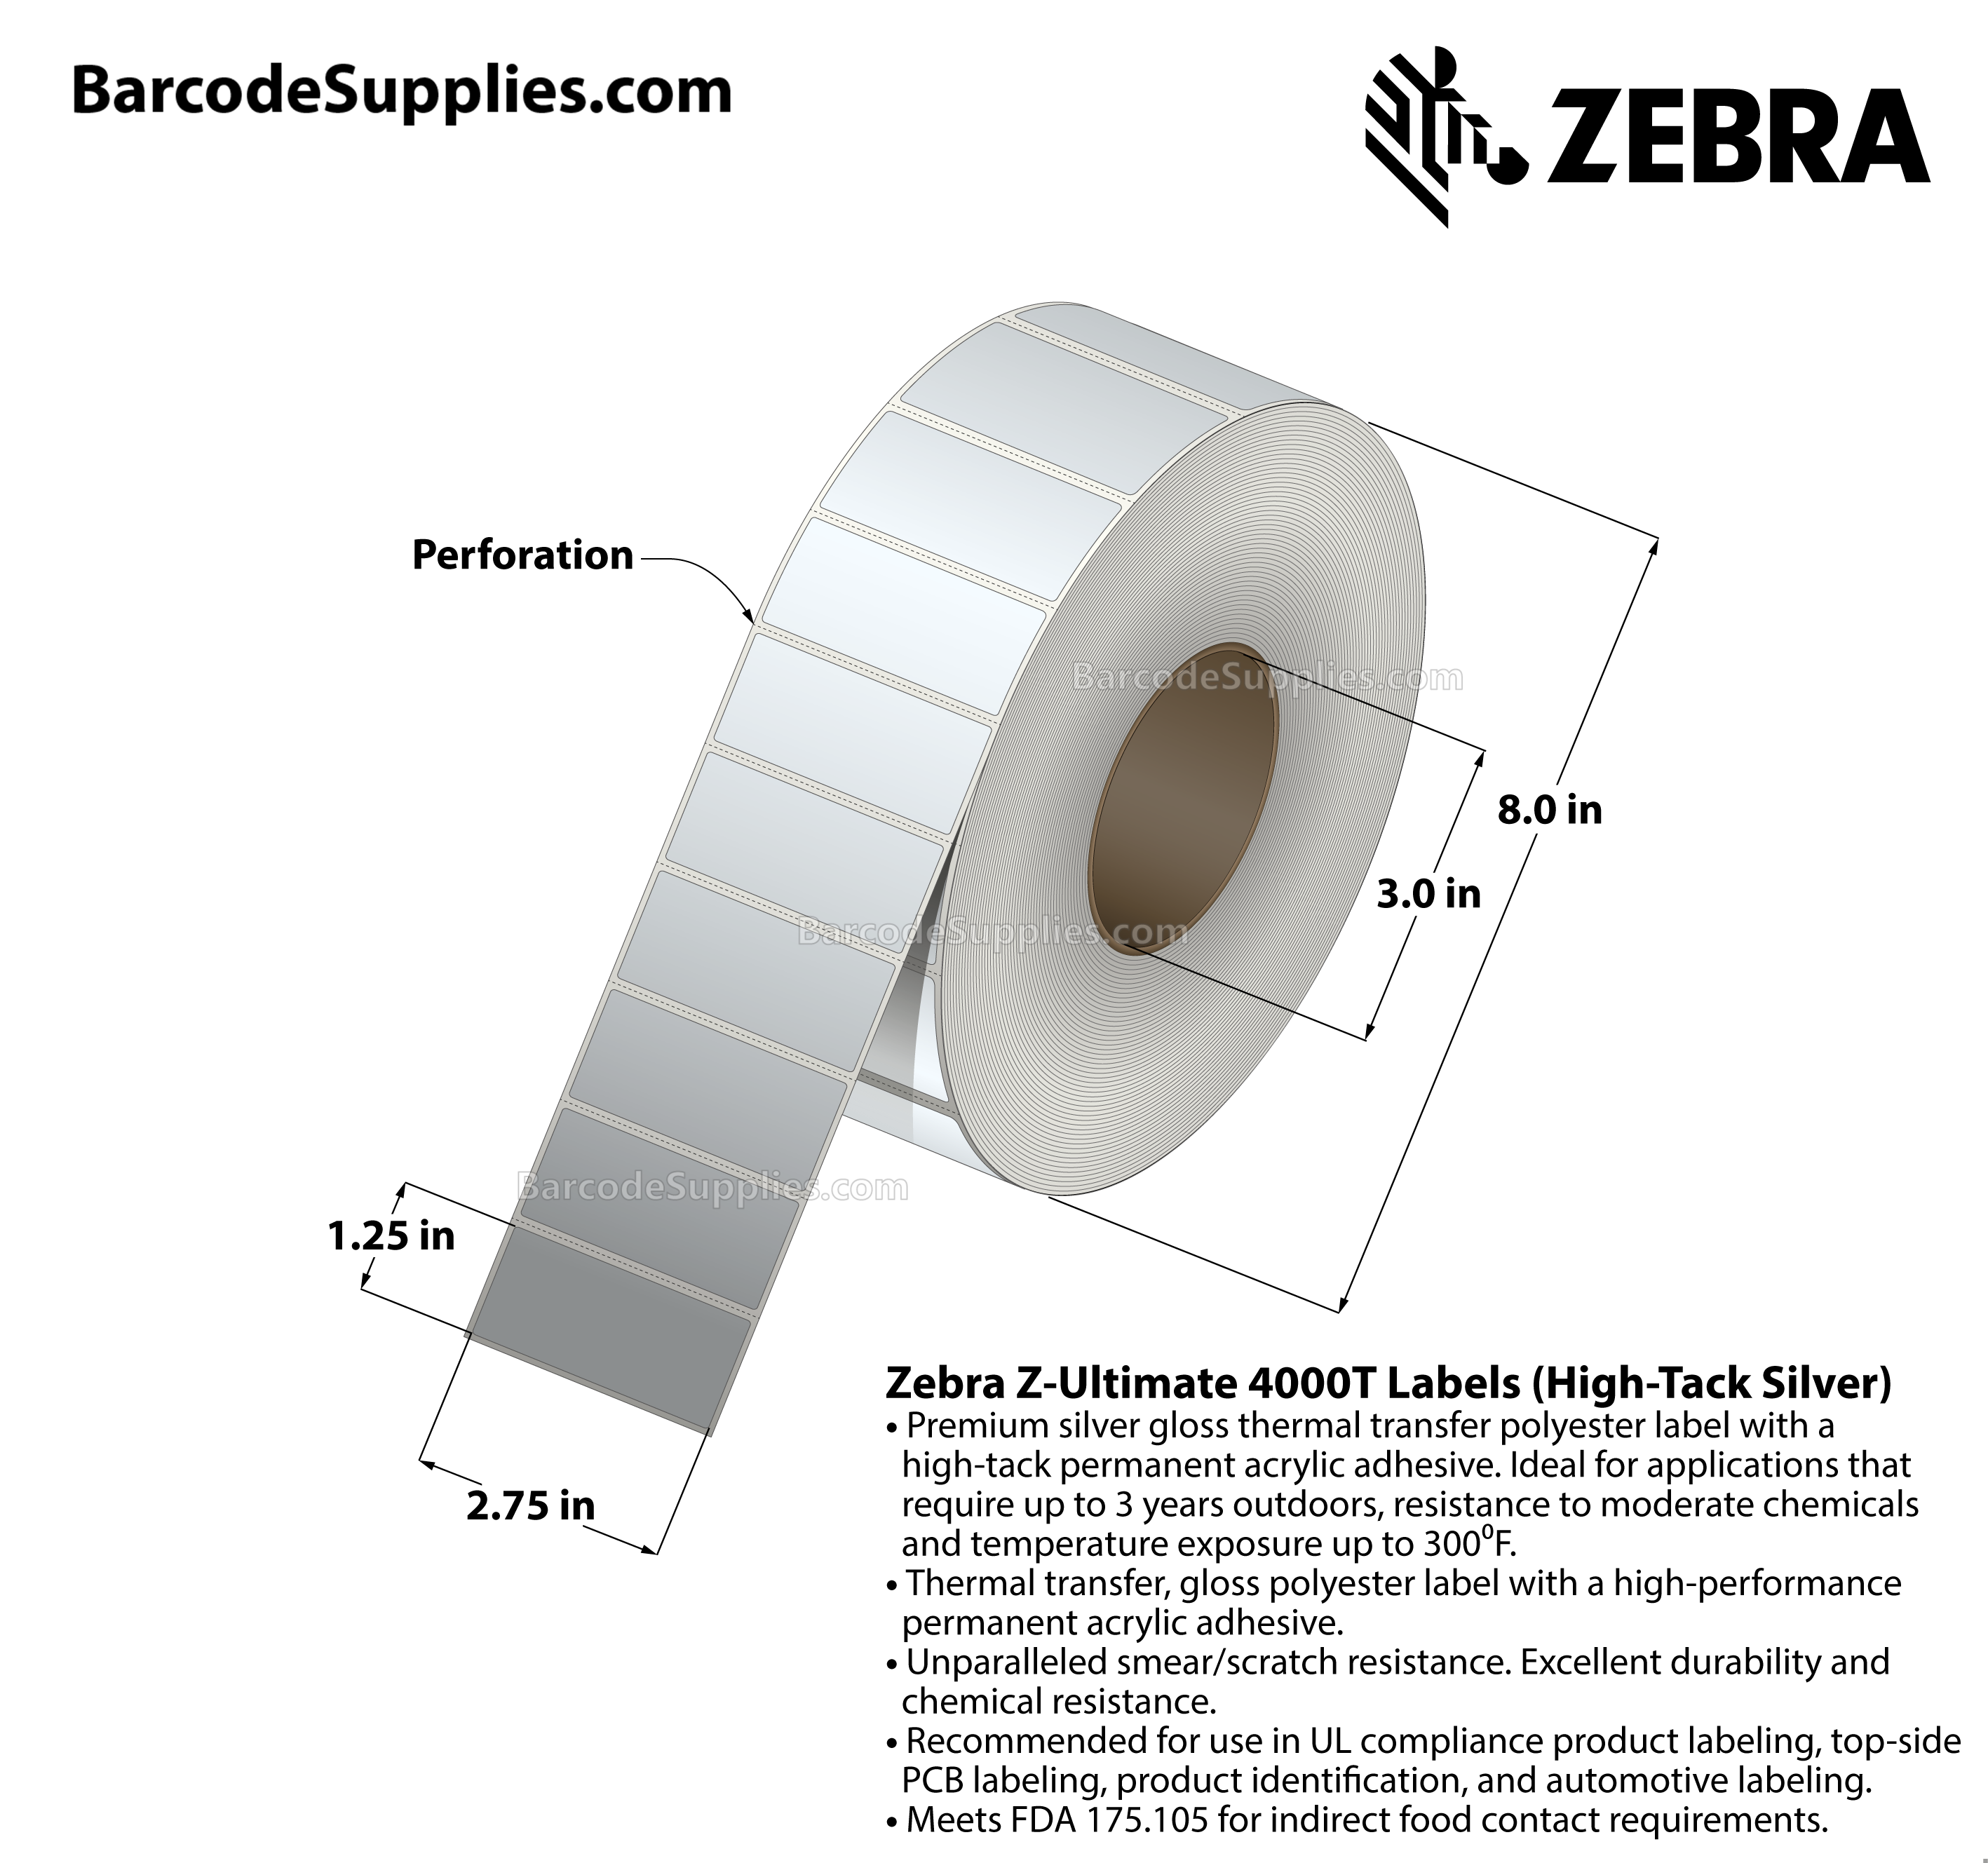 2.75 x 1.25 Thermal Transfer Silver Z-Ultimate 4000T High-Tack Silver Labels With High-tack Adhesive - Perforated - 3000 Labels Per Roll - Carton Of 1 Rolls - 3000 Labels Total - MPN: 10023354